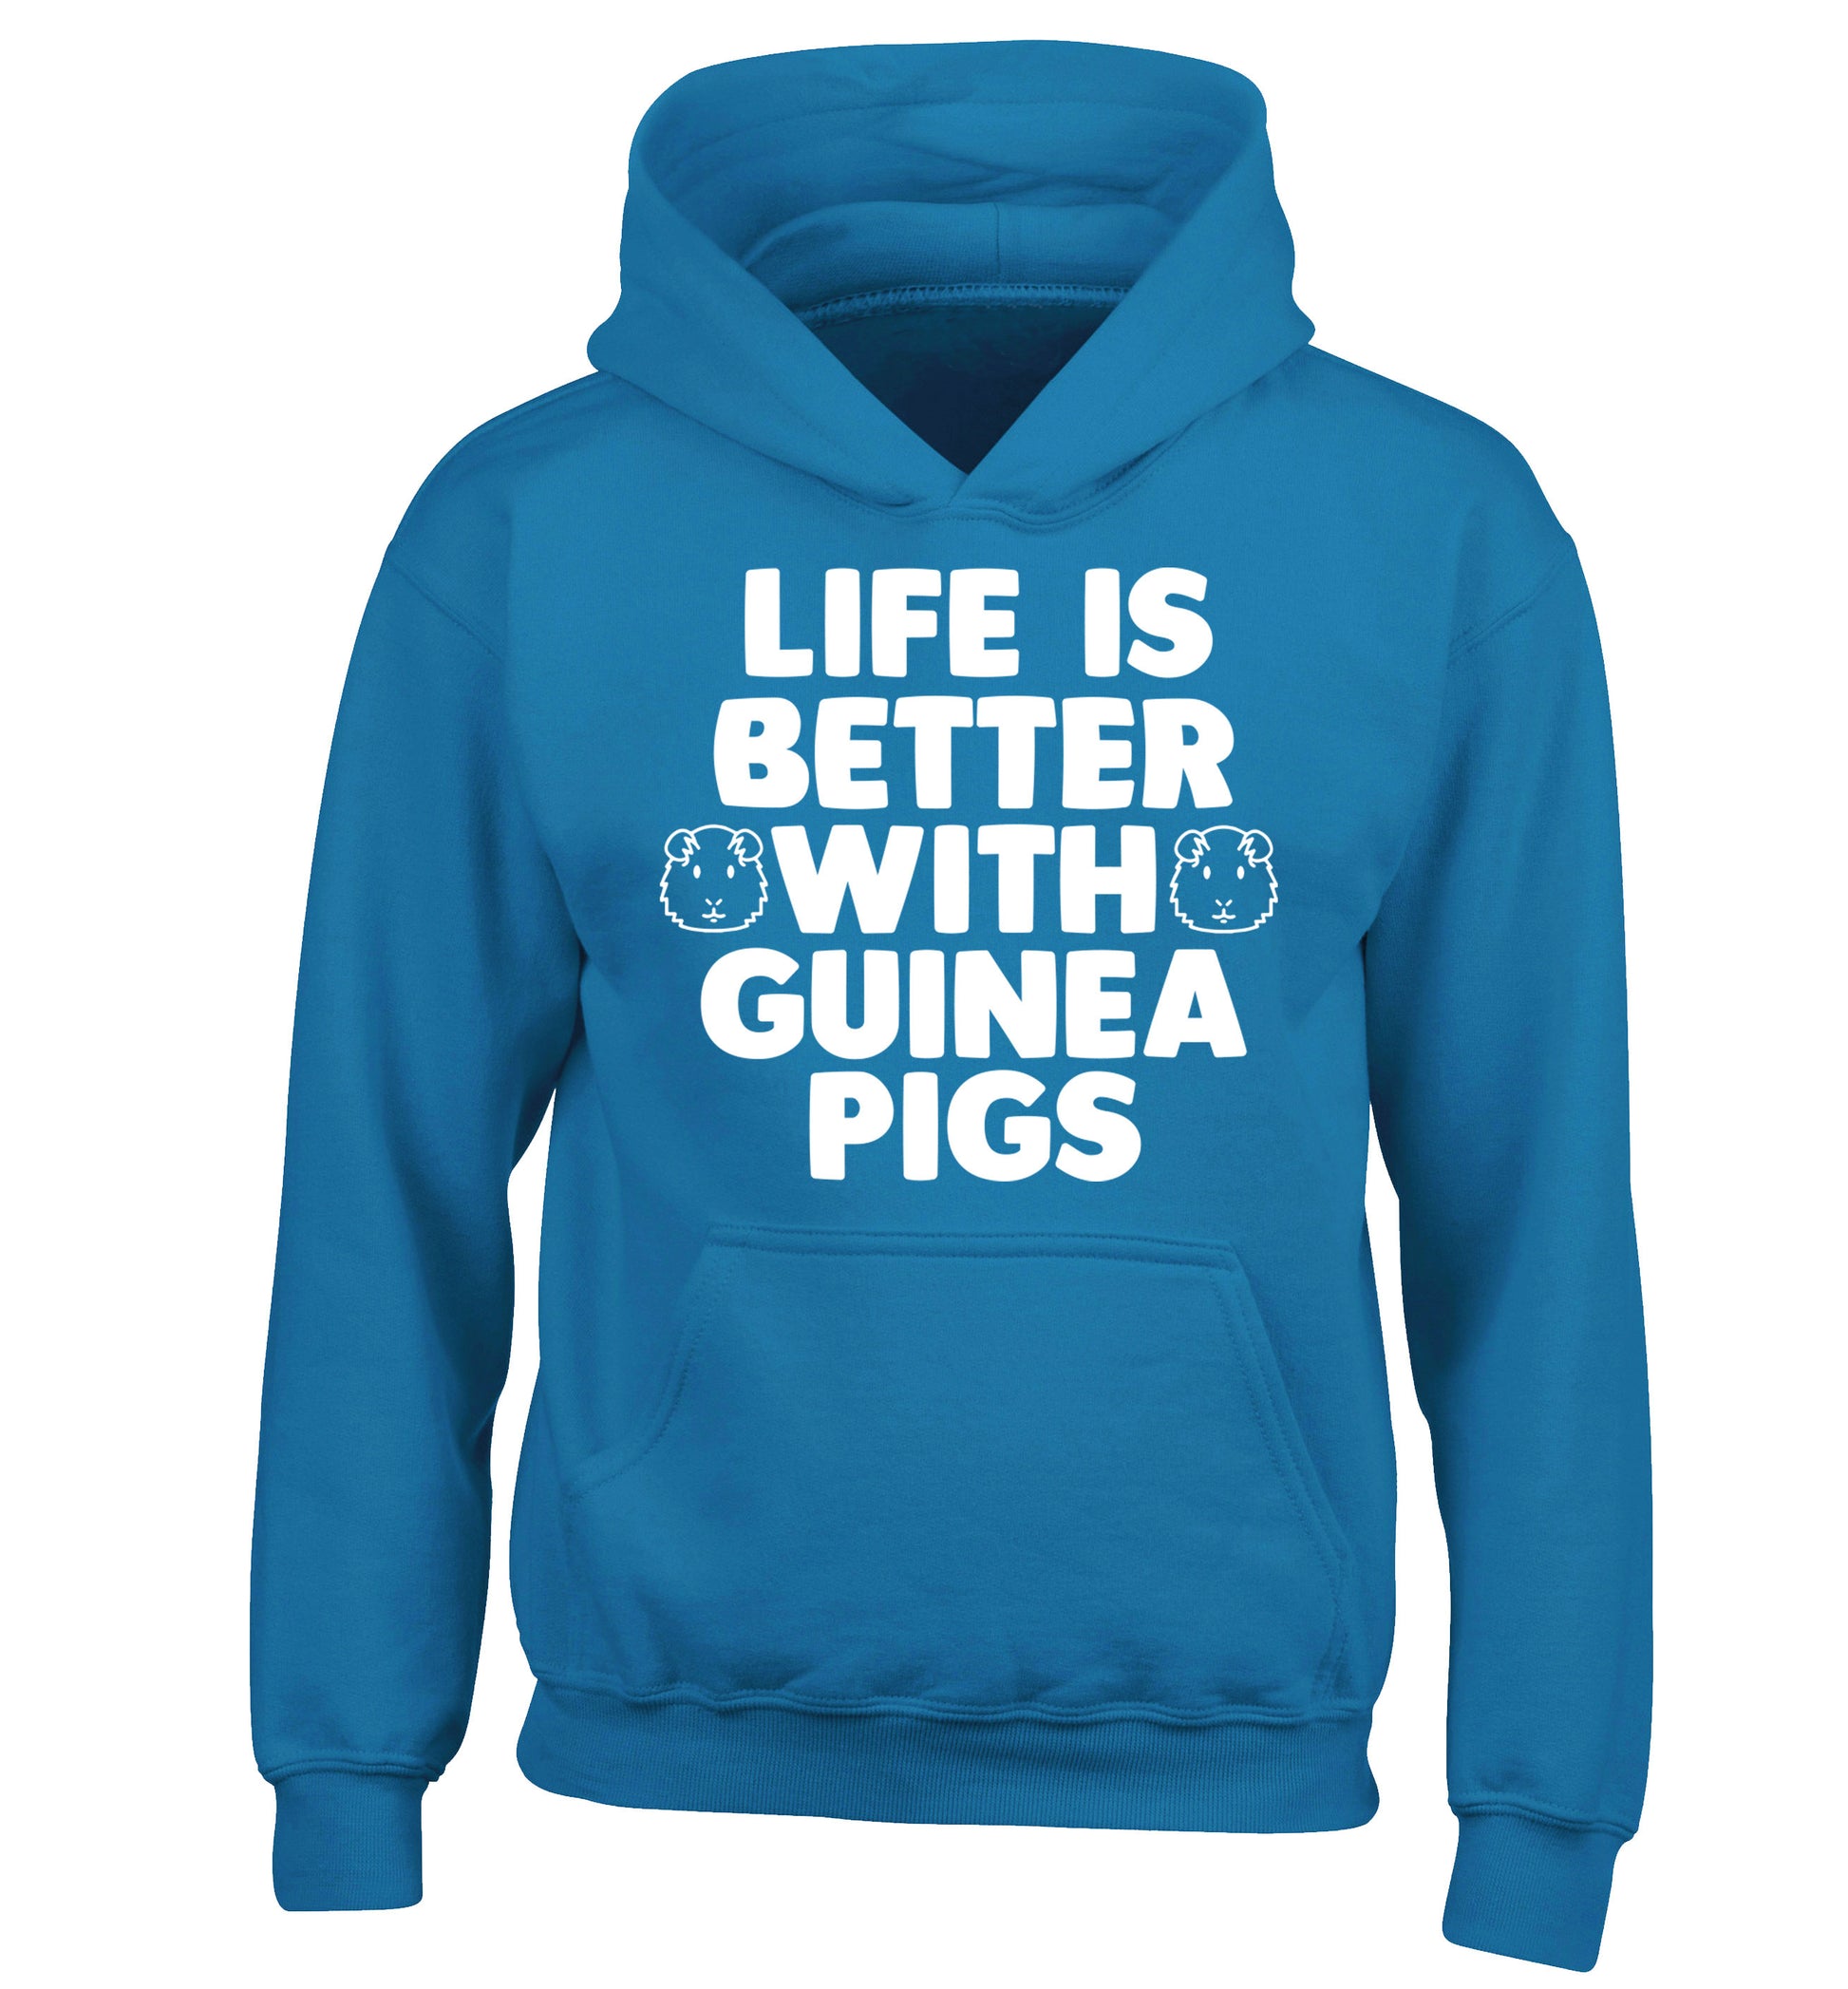 Life is better with guinea pigs children's blue hoodie 12-14 Years